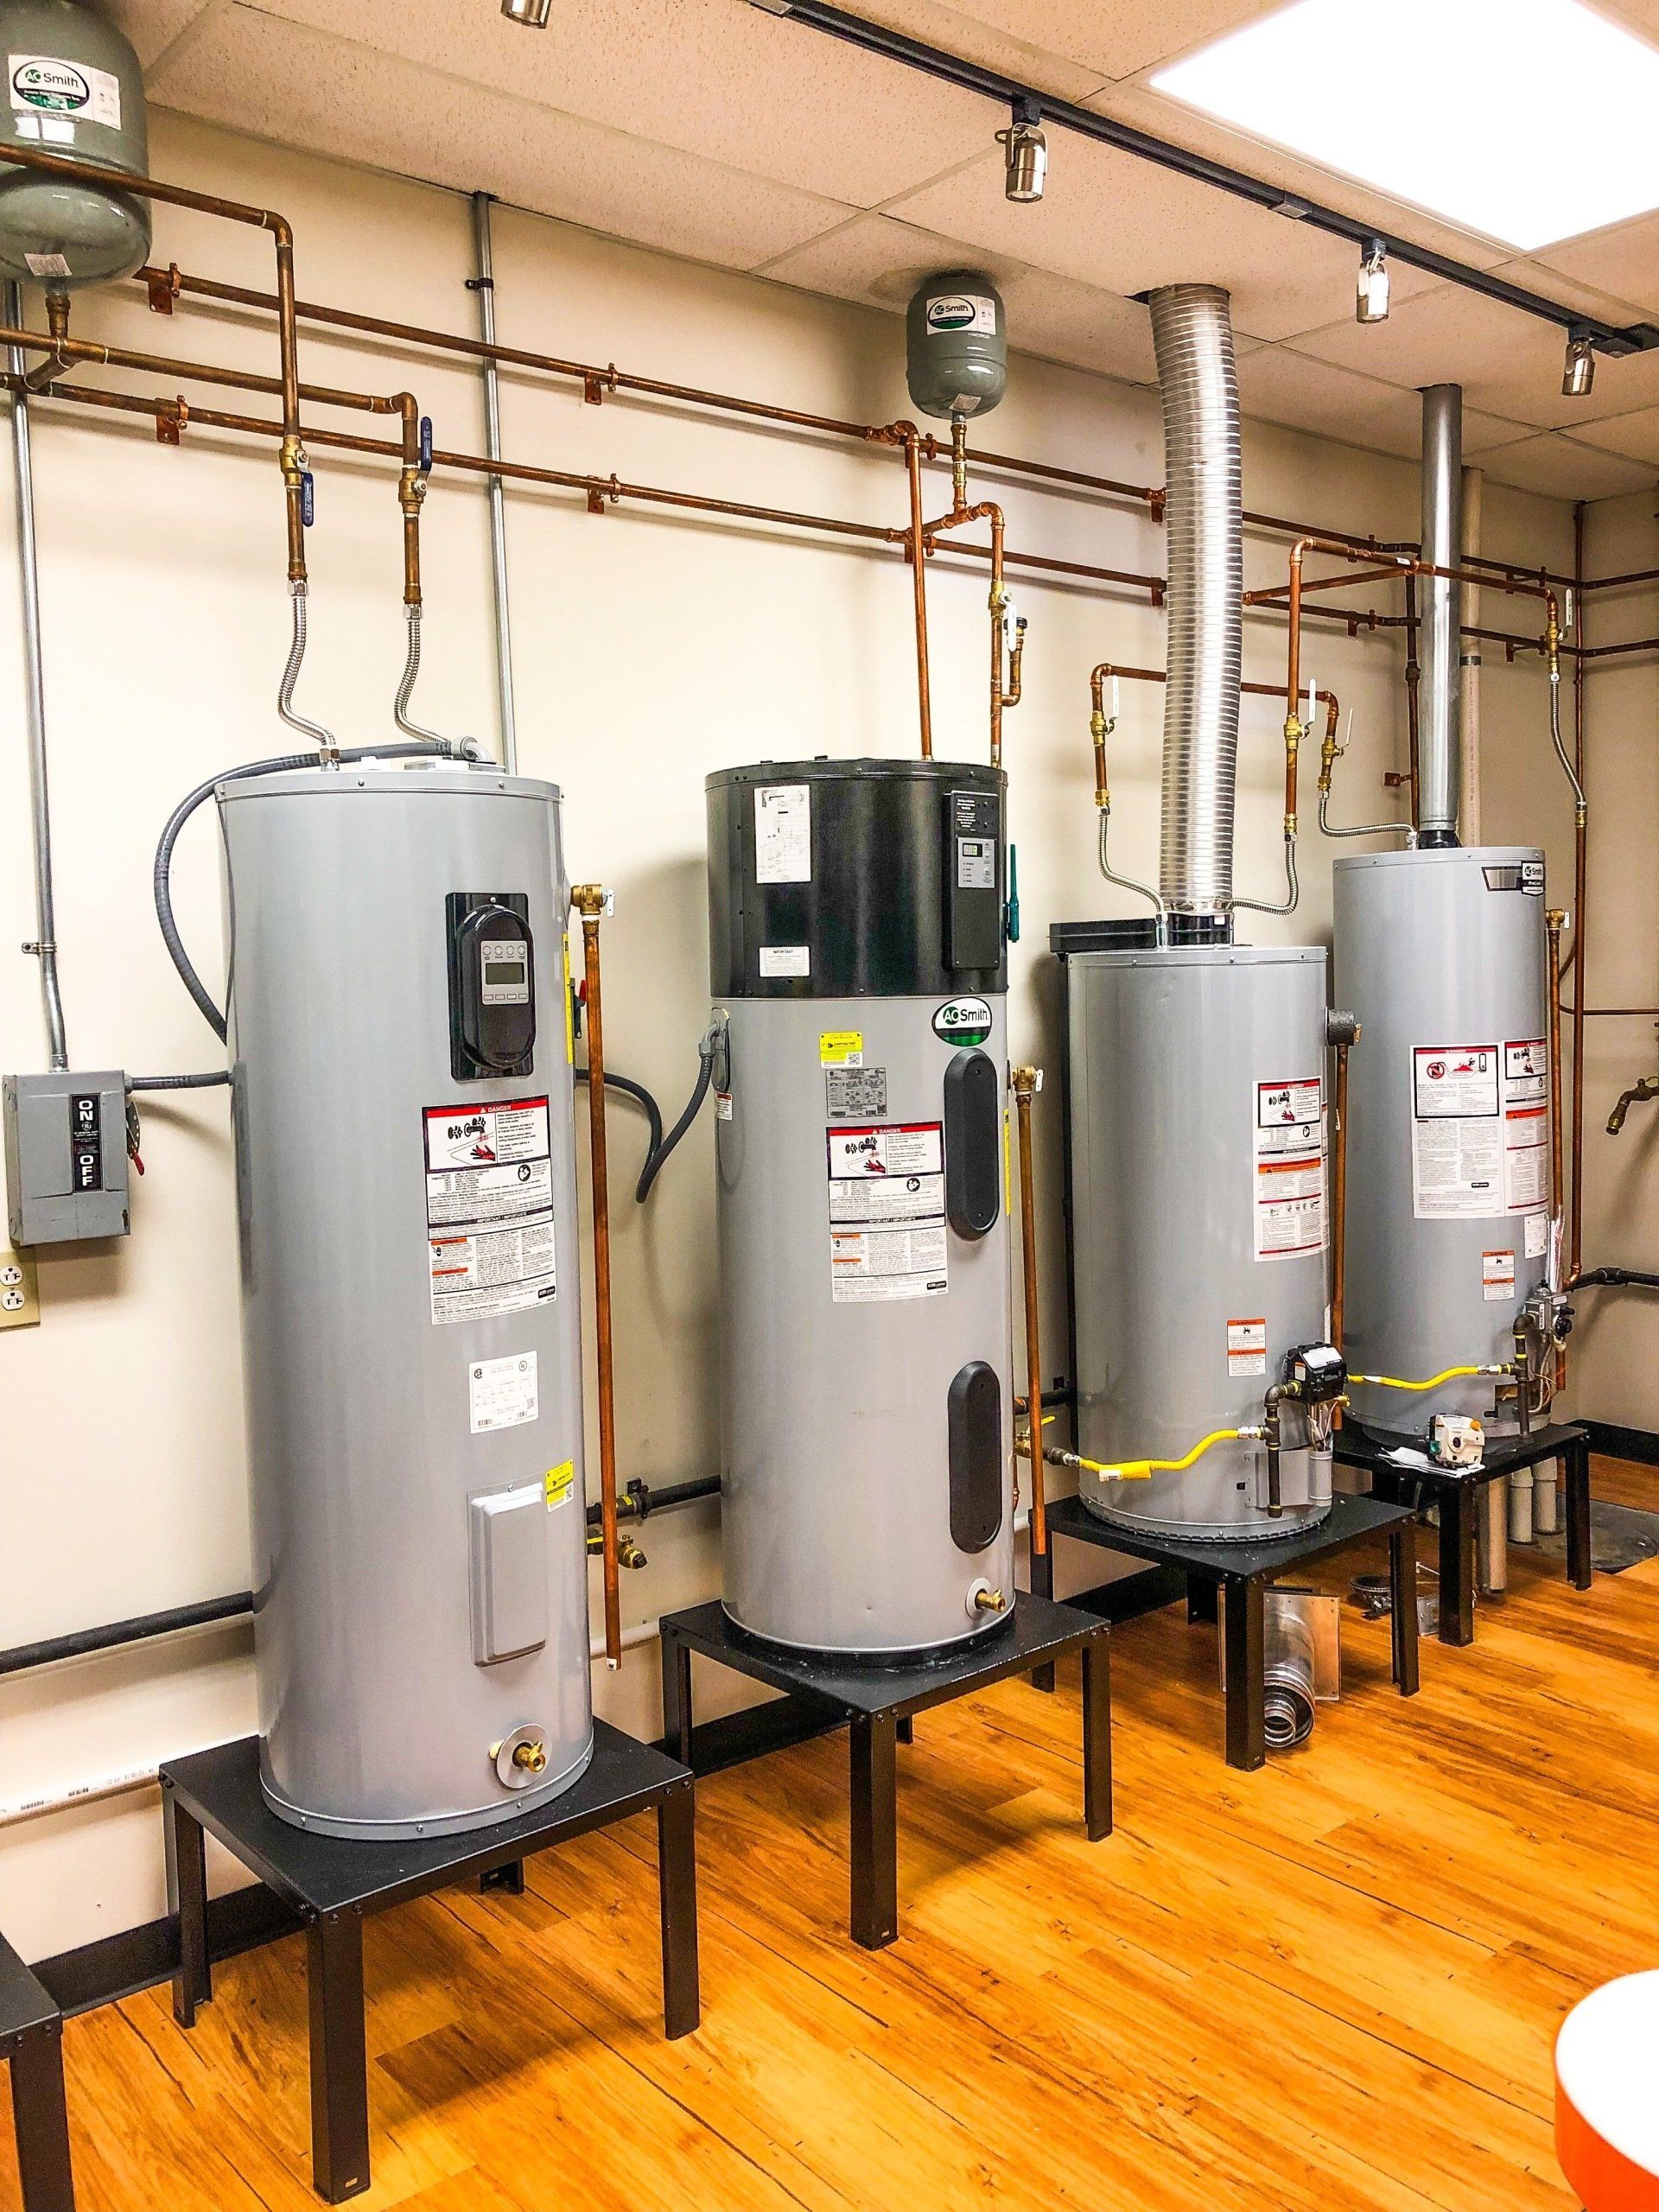 A.O. Smith University - Residential water heaters